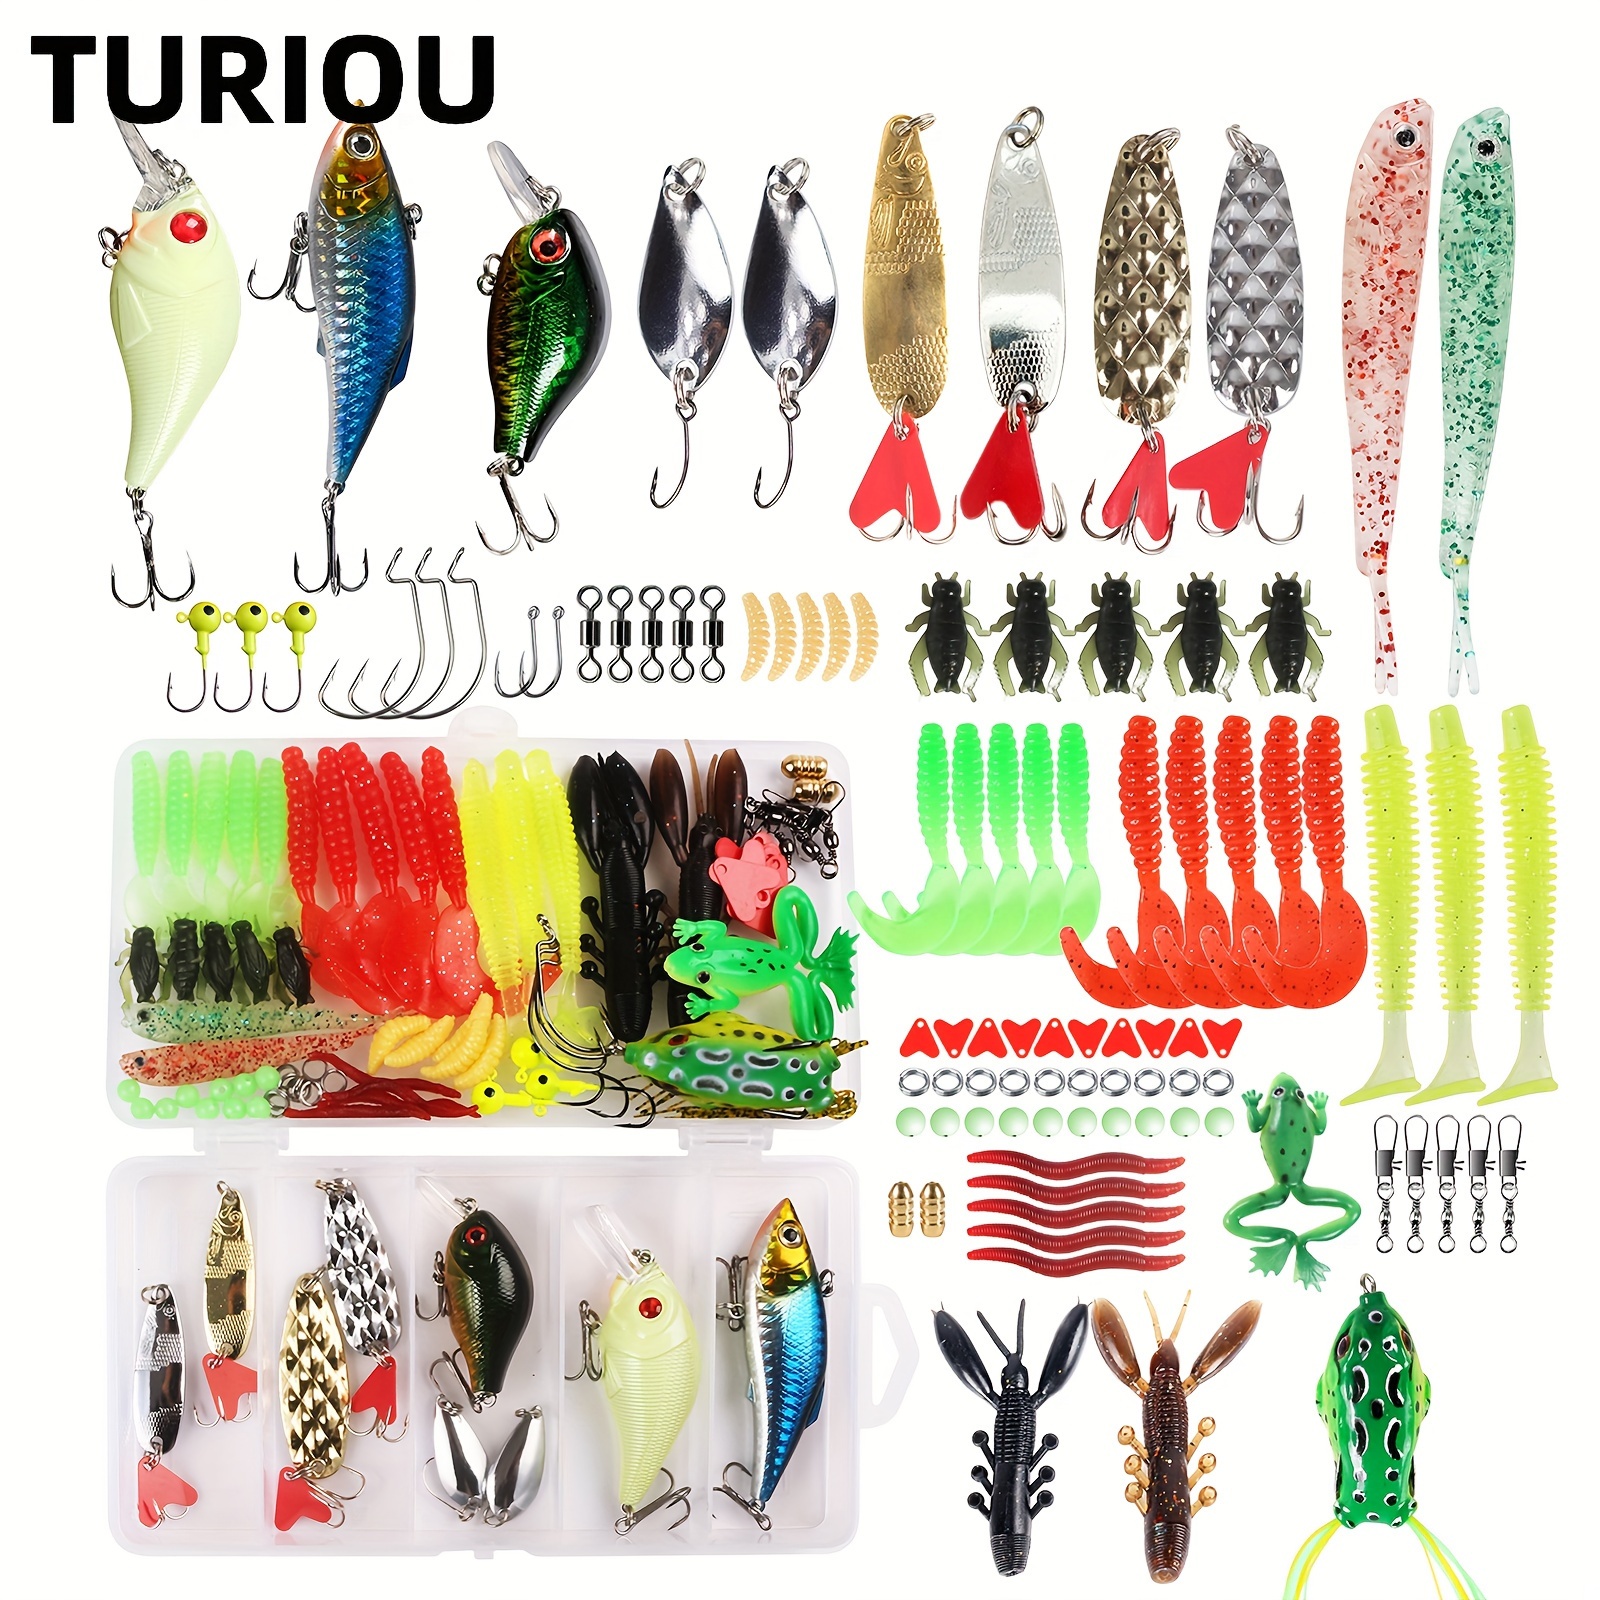 94pcs Freshwater Bait Fishing Tackle Kit, Including Fishing Soft/Hard Bait,  Plastic Bionic Worm Lure, And More Accessories